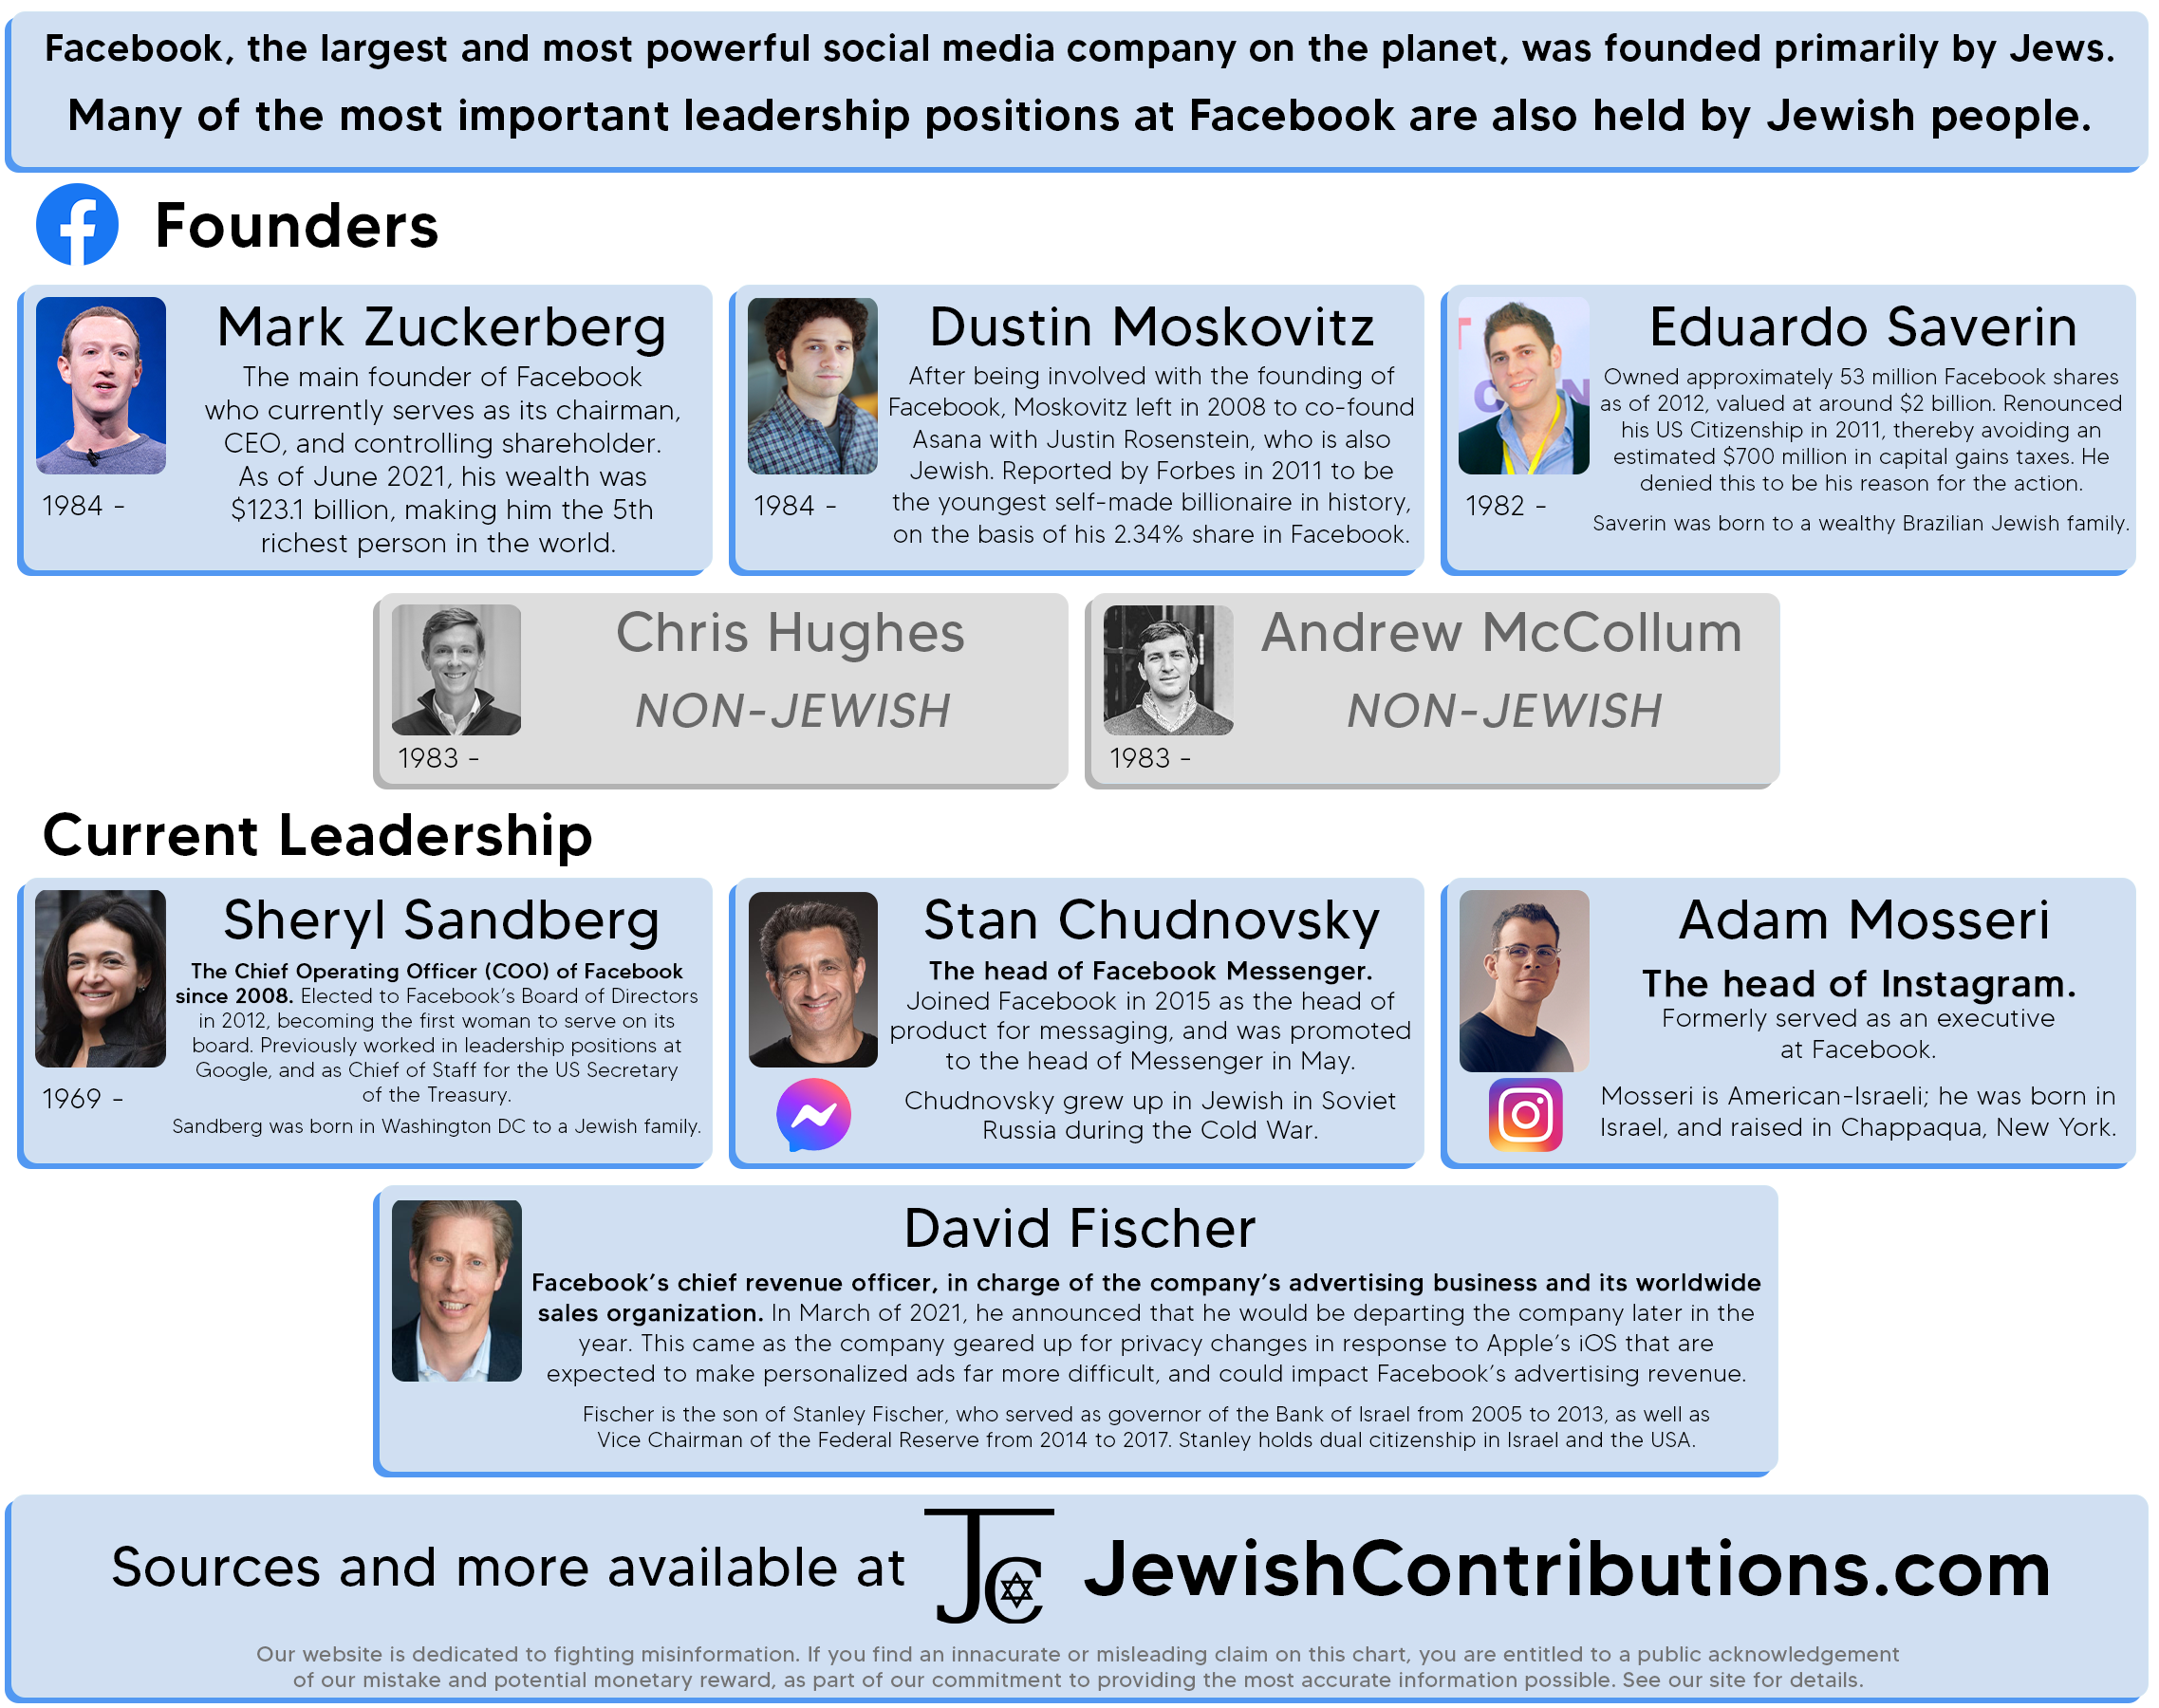 Facebook was founded primarily by Jews. Many of the most important leadership positions at Facebook are also held by Jewish people.